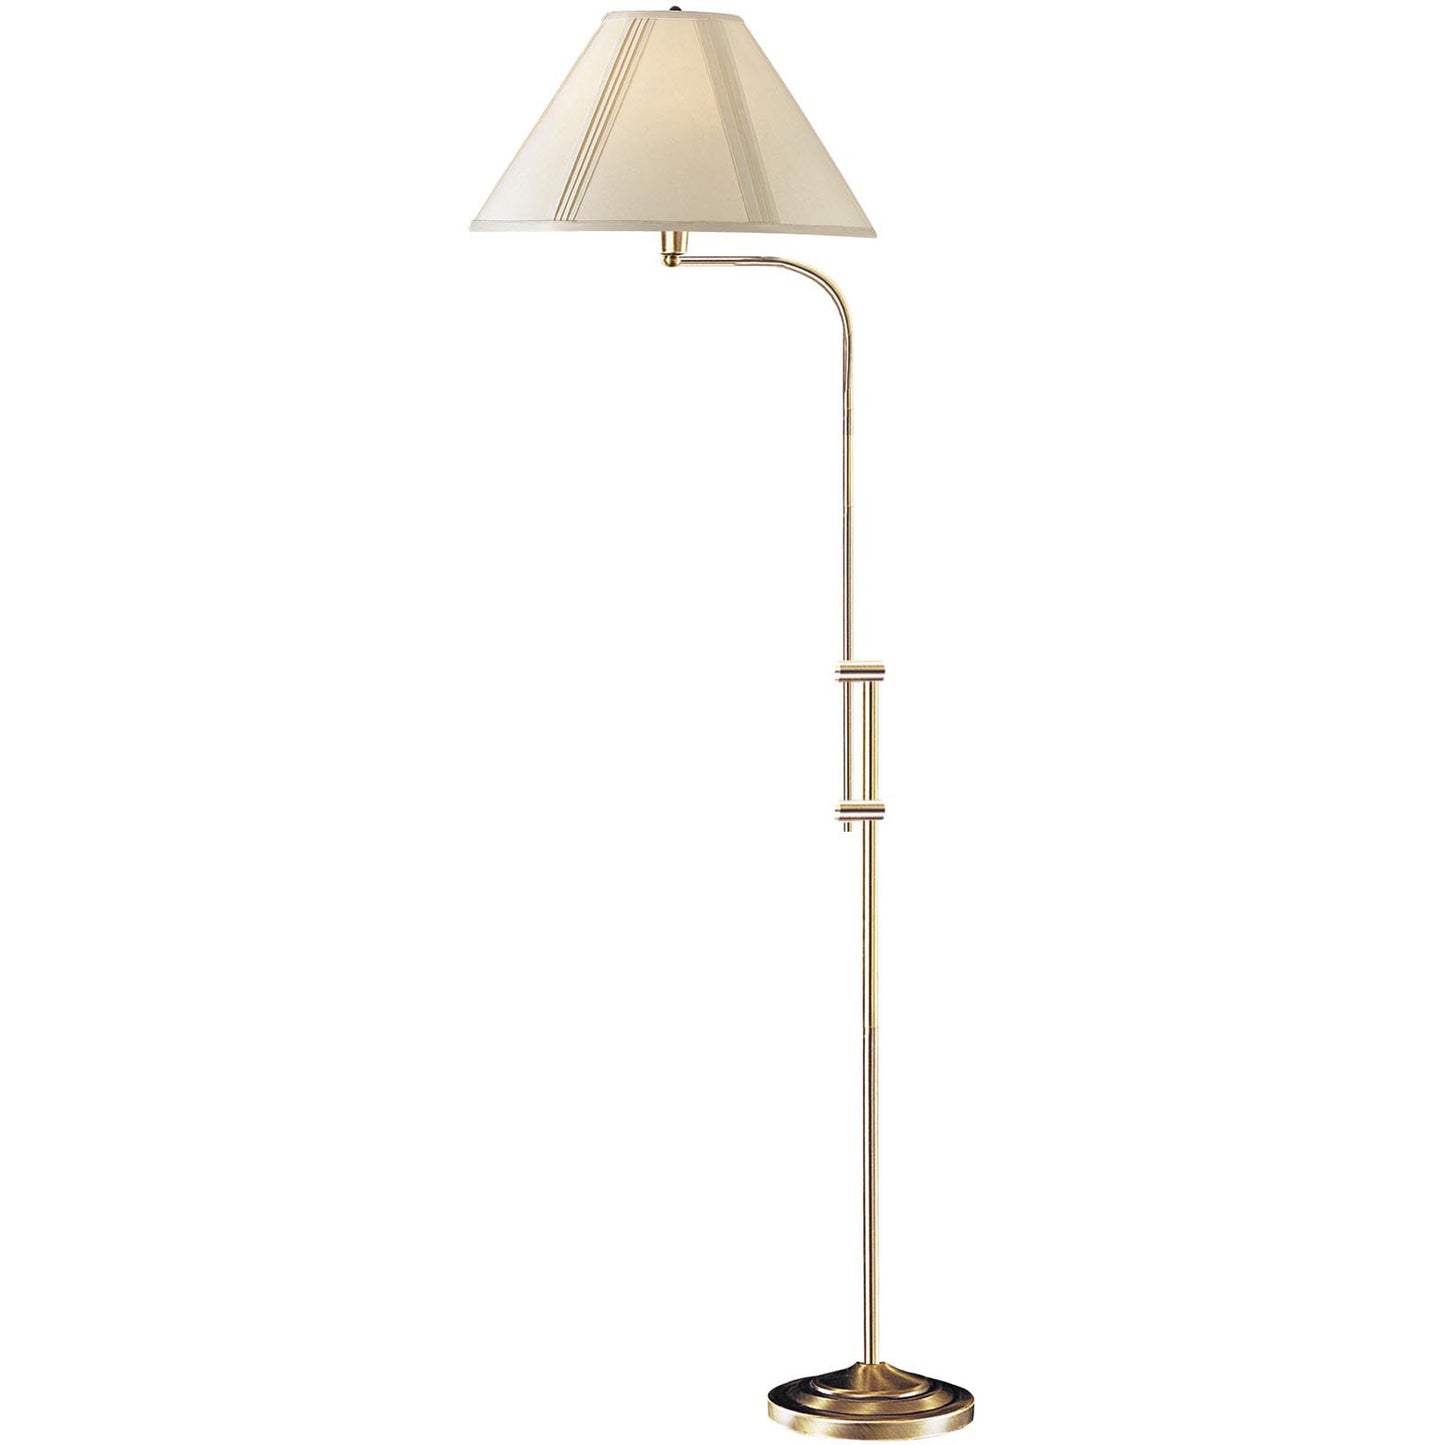 68" Bronze Adjustable Traditional Shaped Floor Lamp With Beige Empire Shade